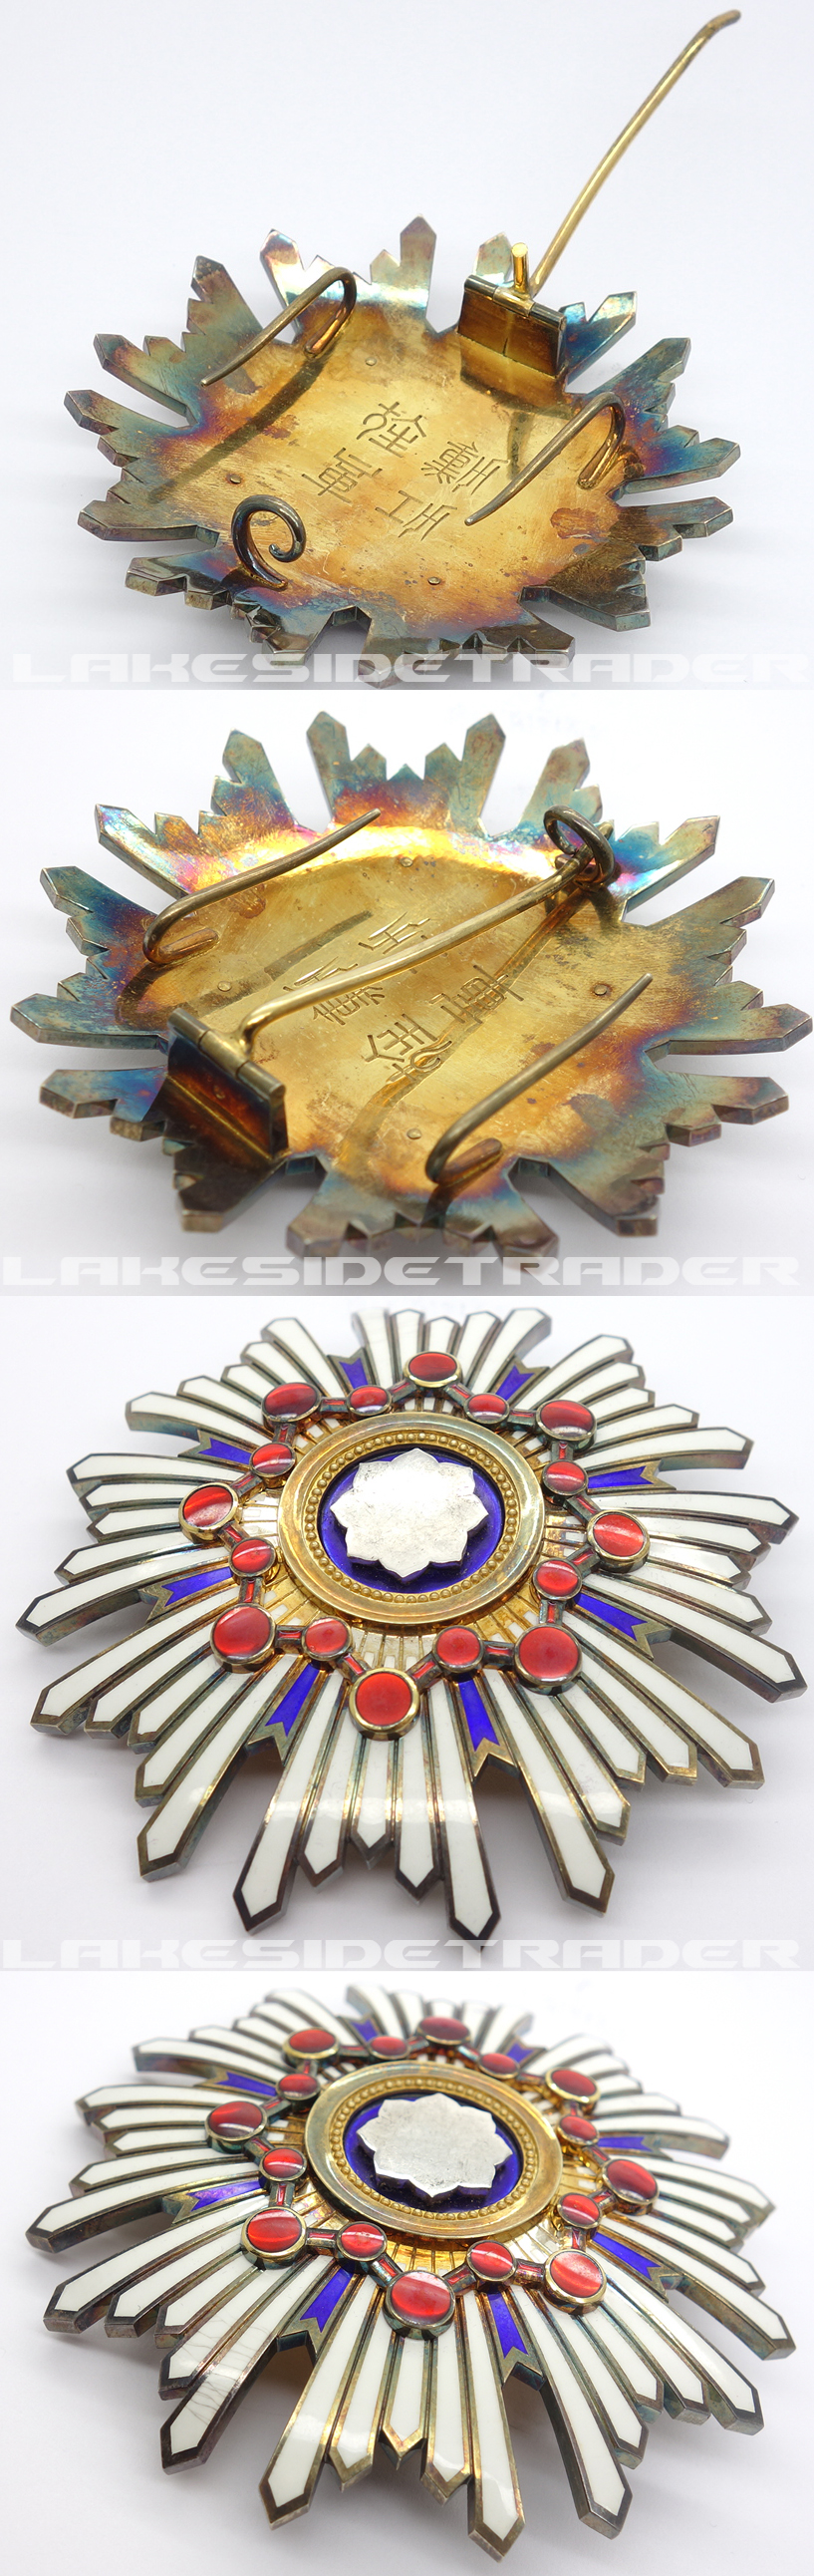 Cased Order of the Sacred Treasure 2nd Class Breast Star